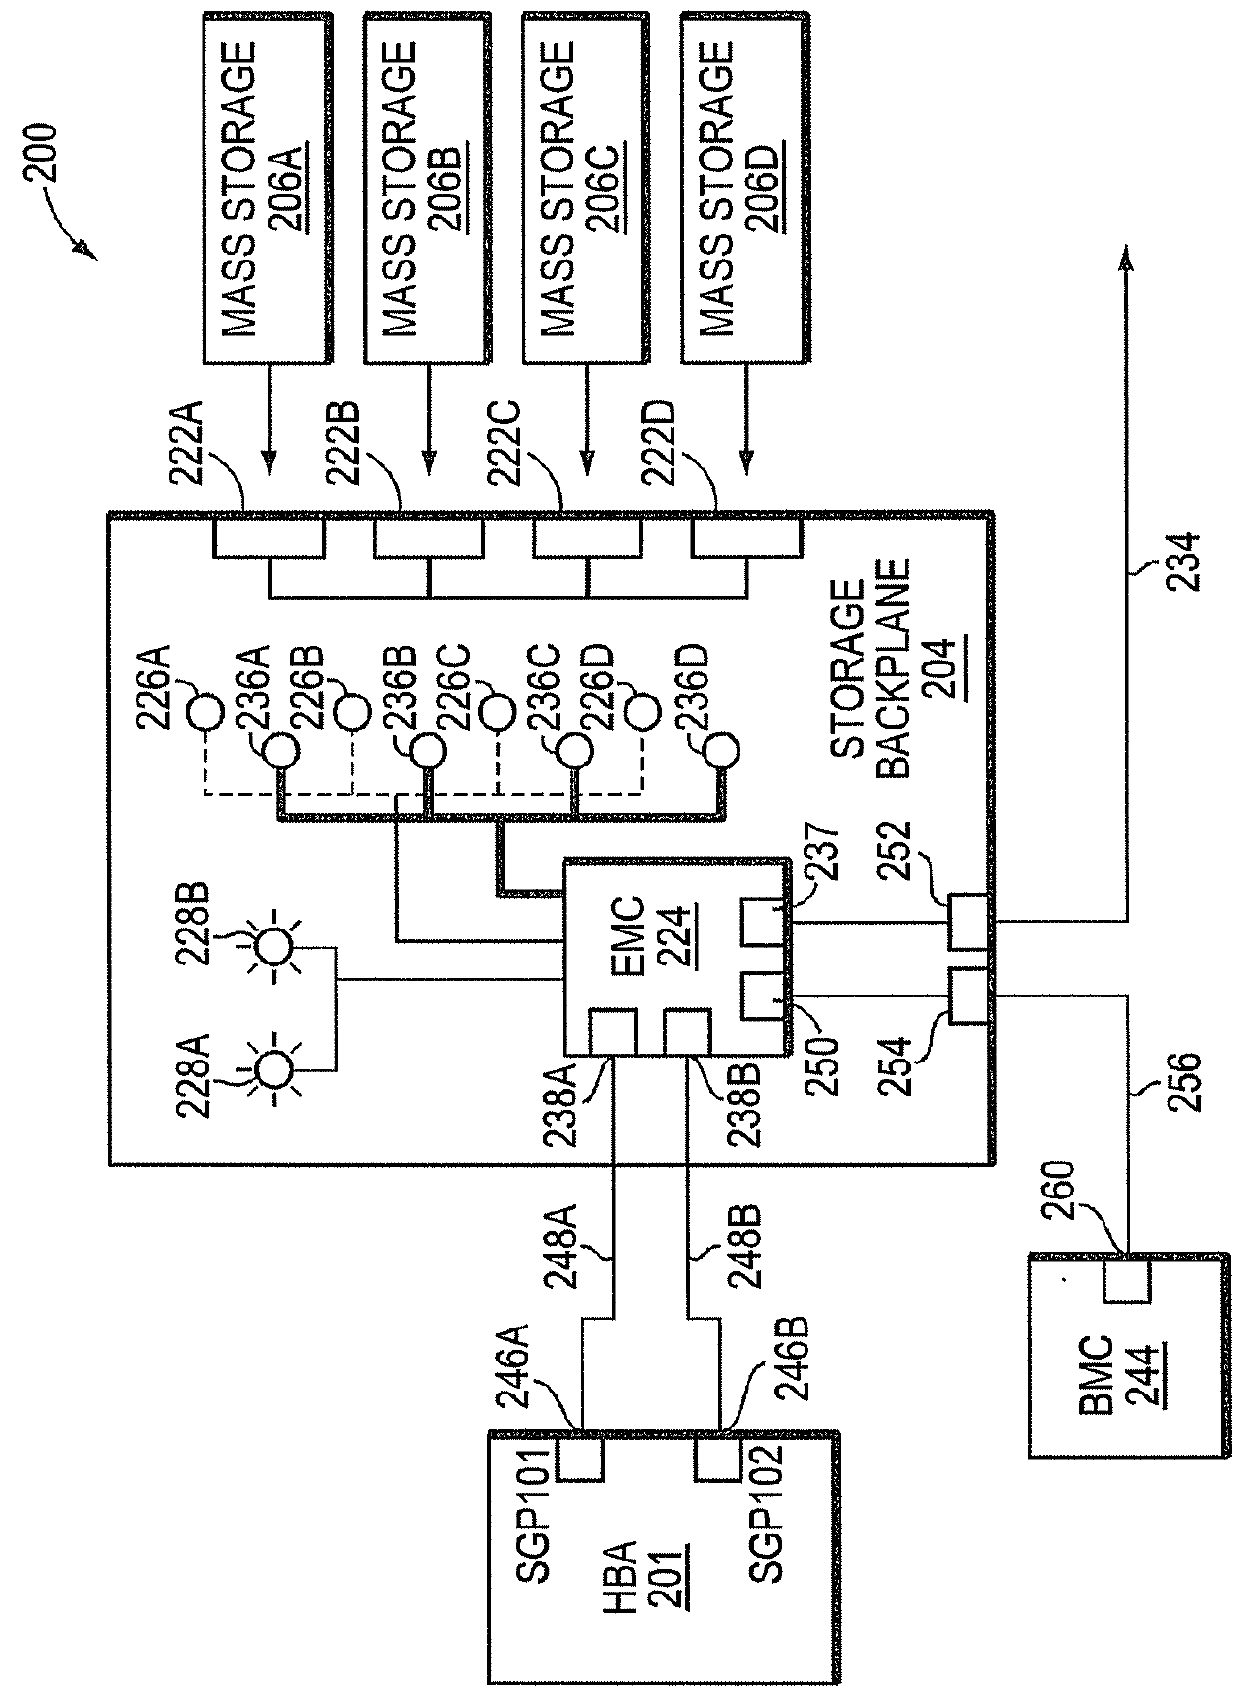 Drive mapping using a plurality of connected enclosure management controllers